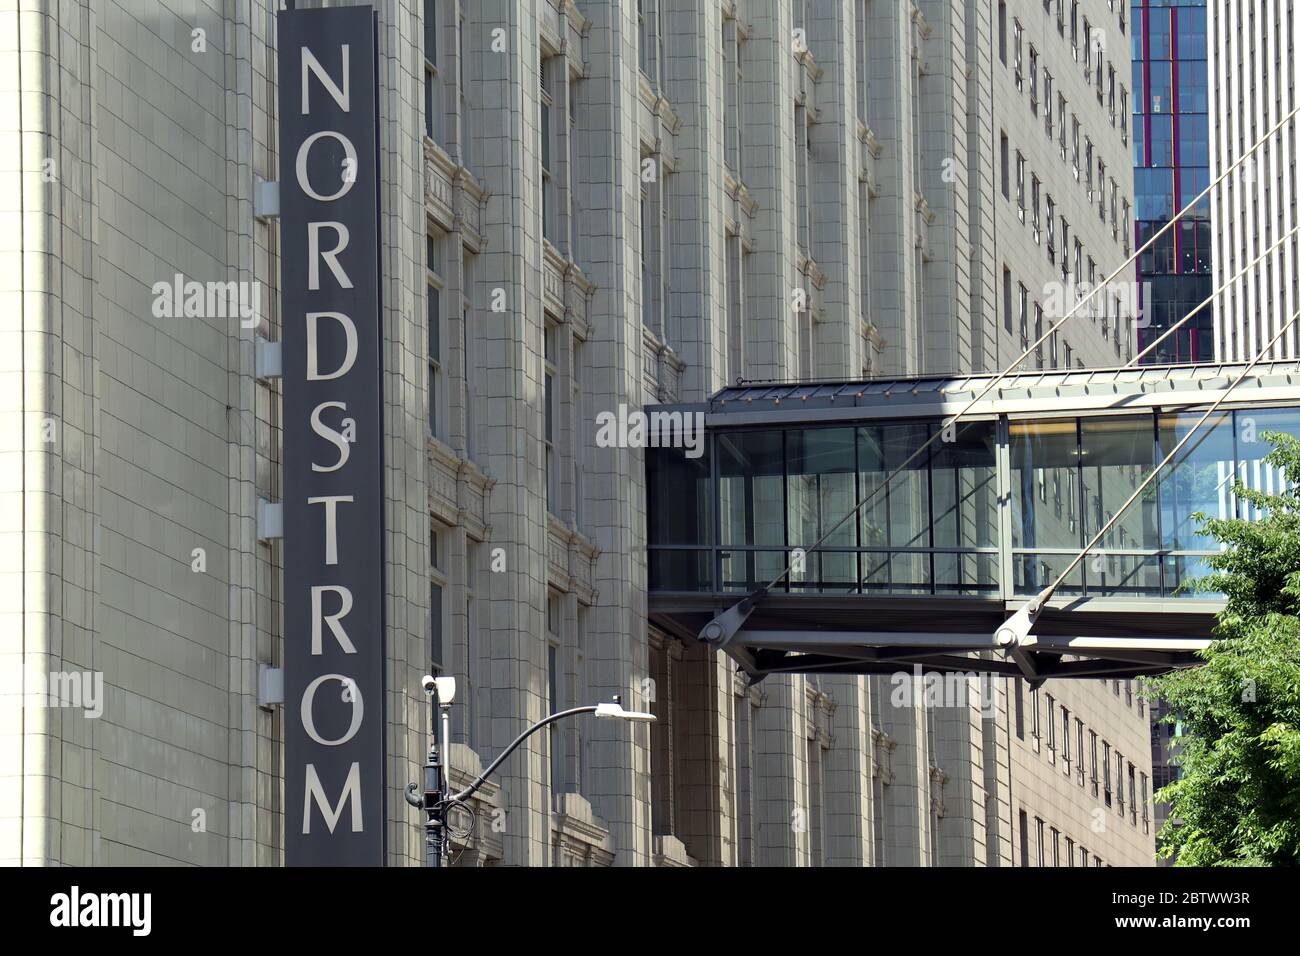 Seattle, United States. 27th May, 2020. The Nordstrom sign is seen on the  front of the company's corporate headquarters in Seattle.The luxury  retailer is expected to report its first quarter earnings soon.